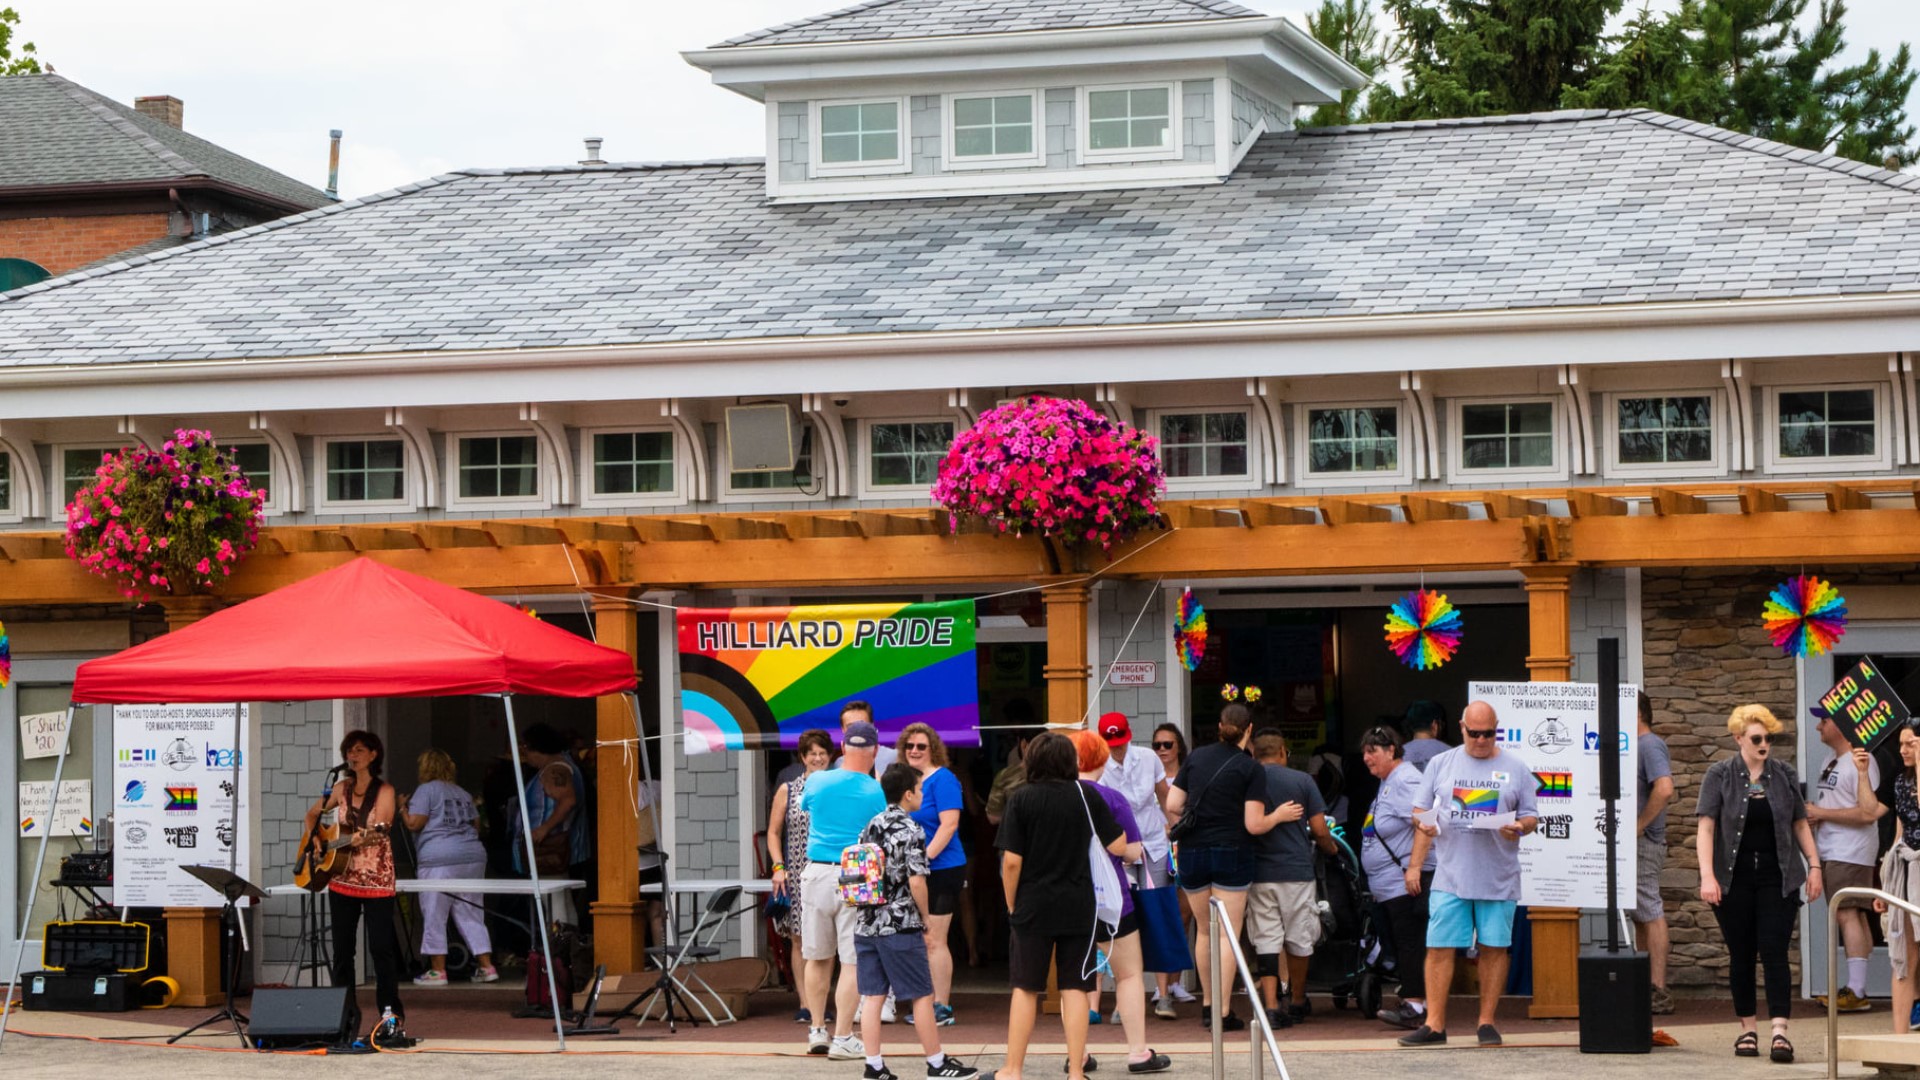 Community leaders from Bexley to Grove City are bringing events for the whole family to celebrate inclusion and acceptance for all this Pride Month.